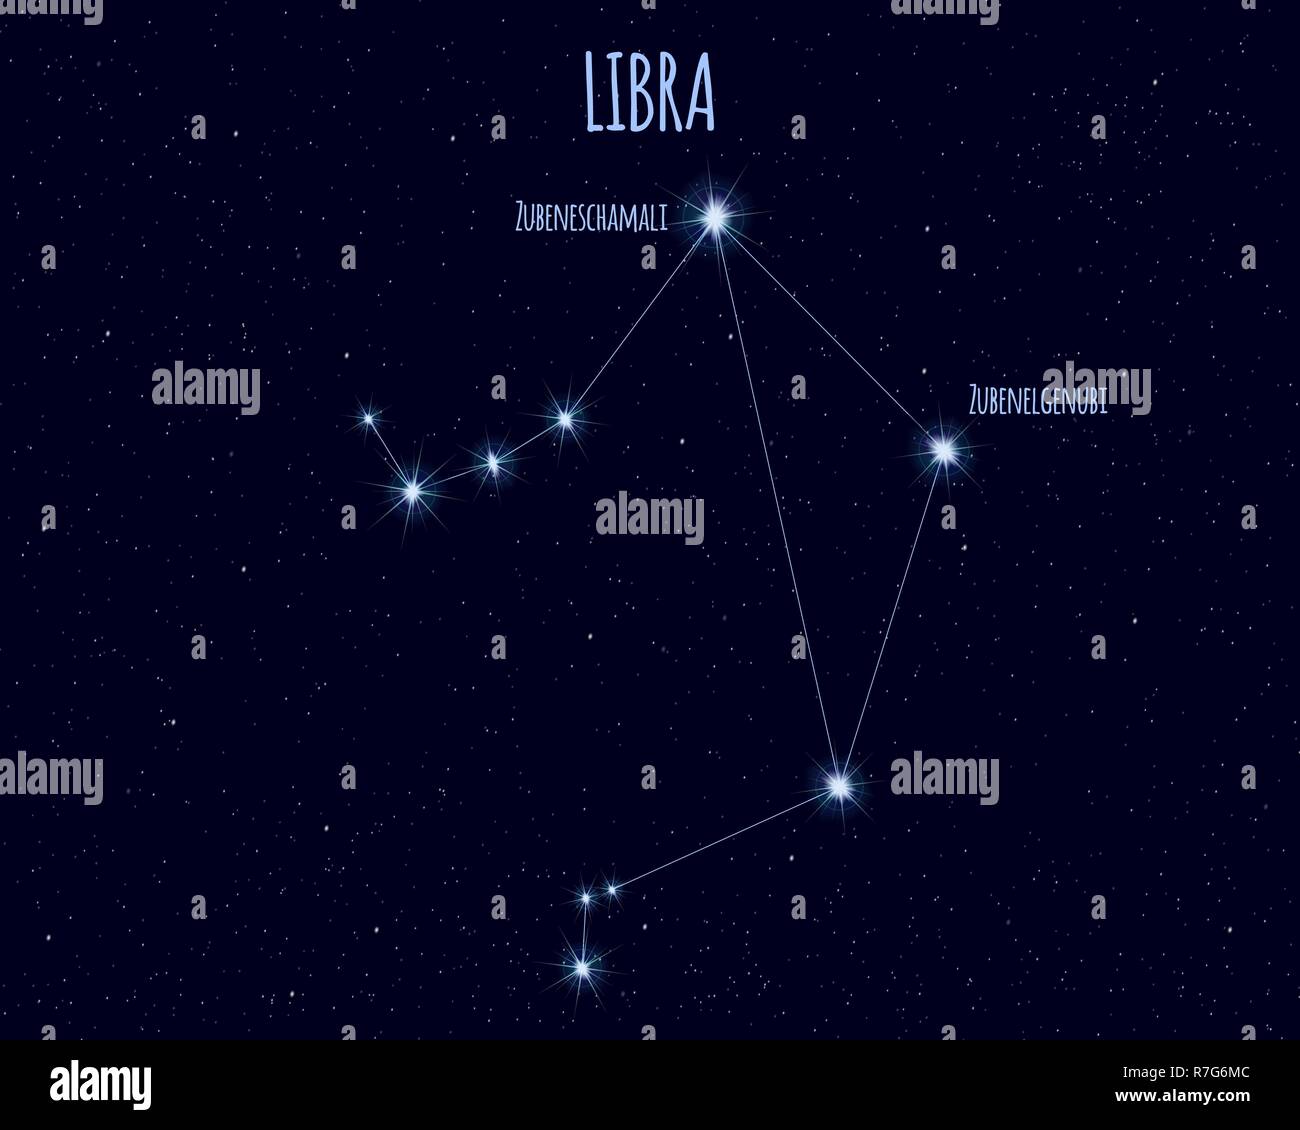 Libra (The Balance) constellation, vector illustration with the names of basic stars against the starry sky Stock Vector